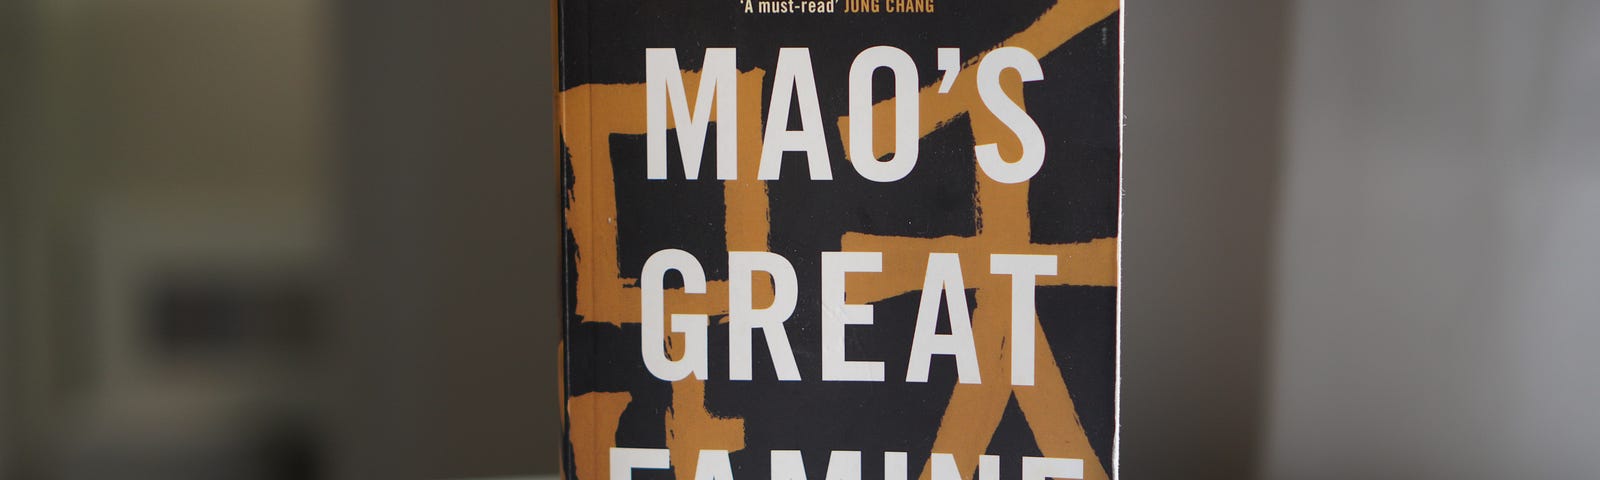 Mao’s Great Famine by Frank Dikotter